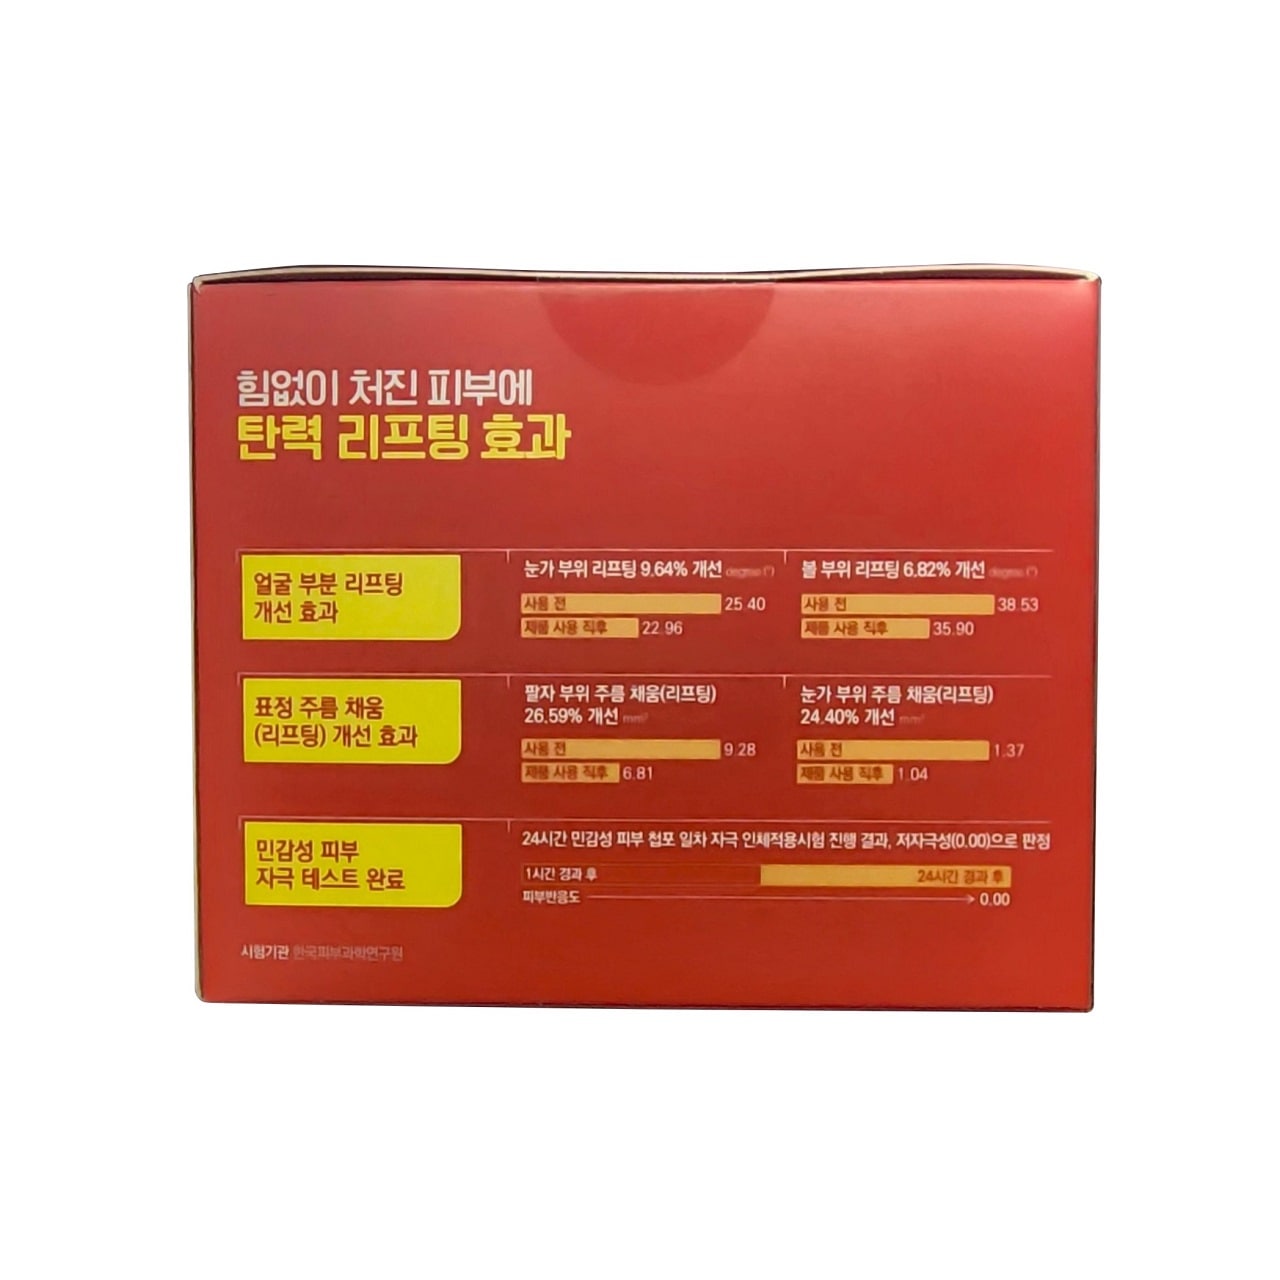 Features for Mediheal Retinol Collagen Lifting Pads (100 count)